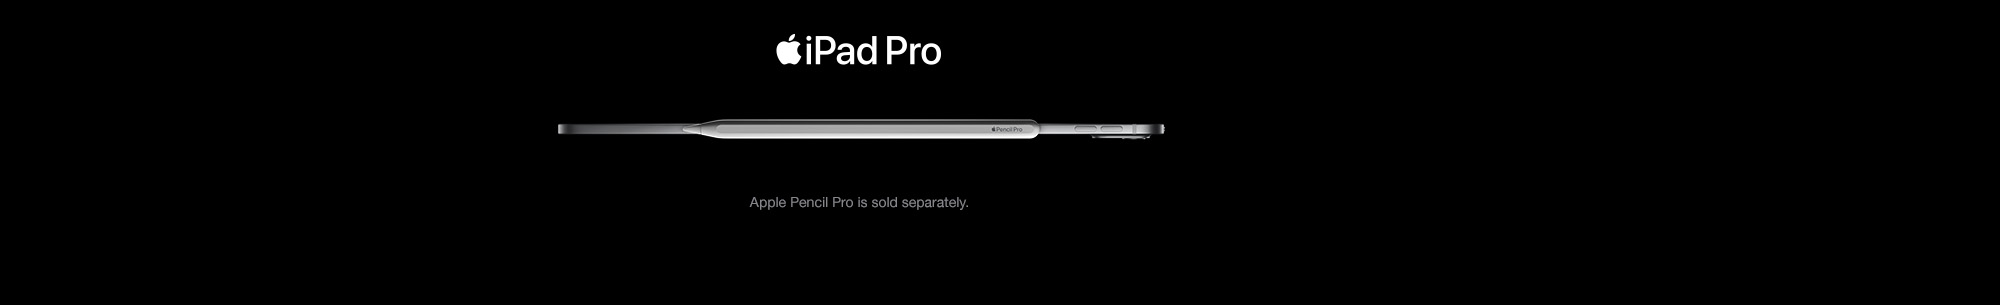 iPad Pro. Apple Pencil Pro is sold separately.